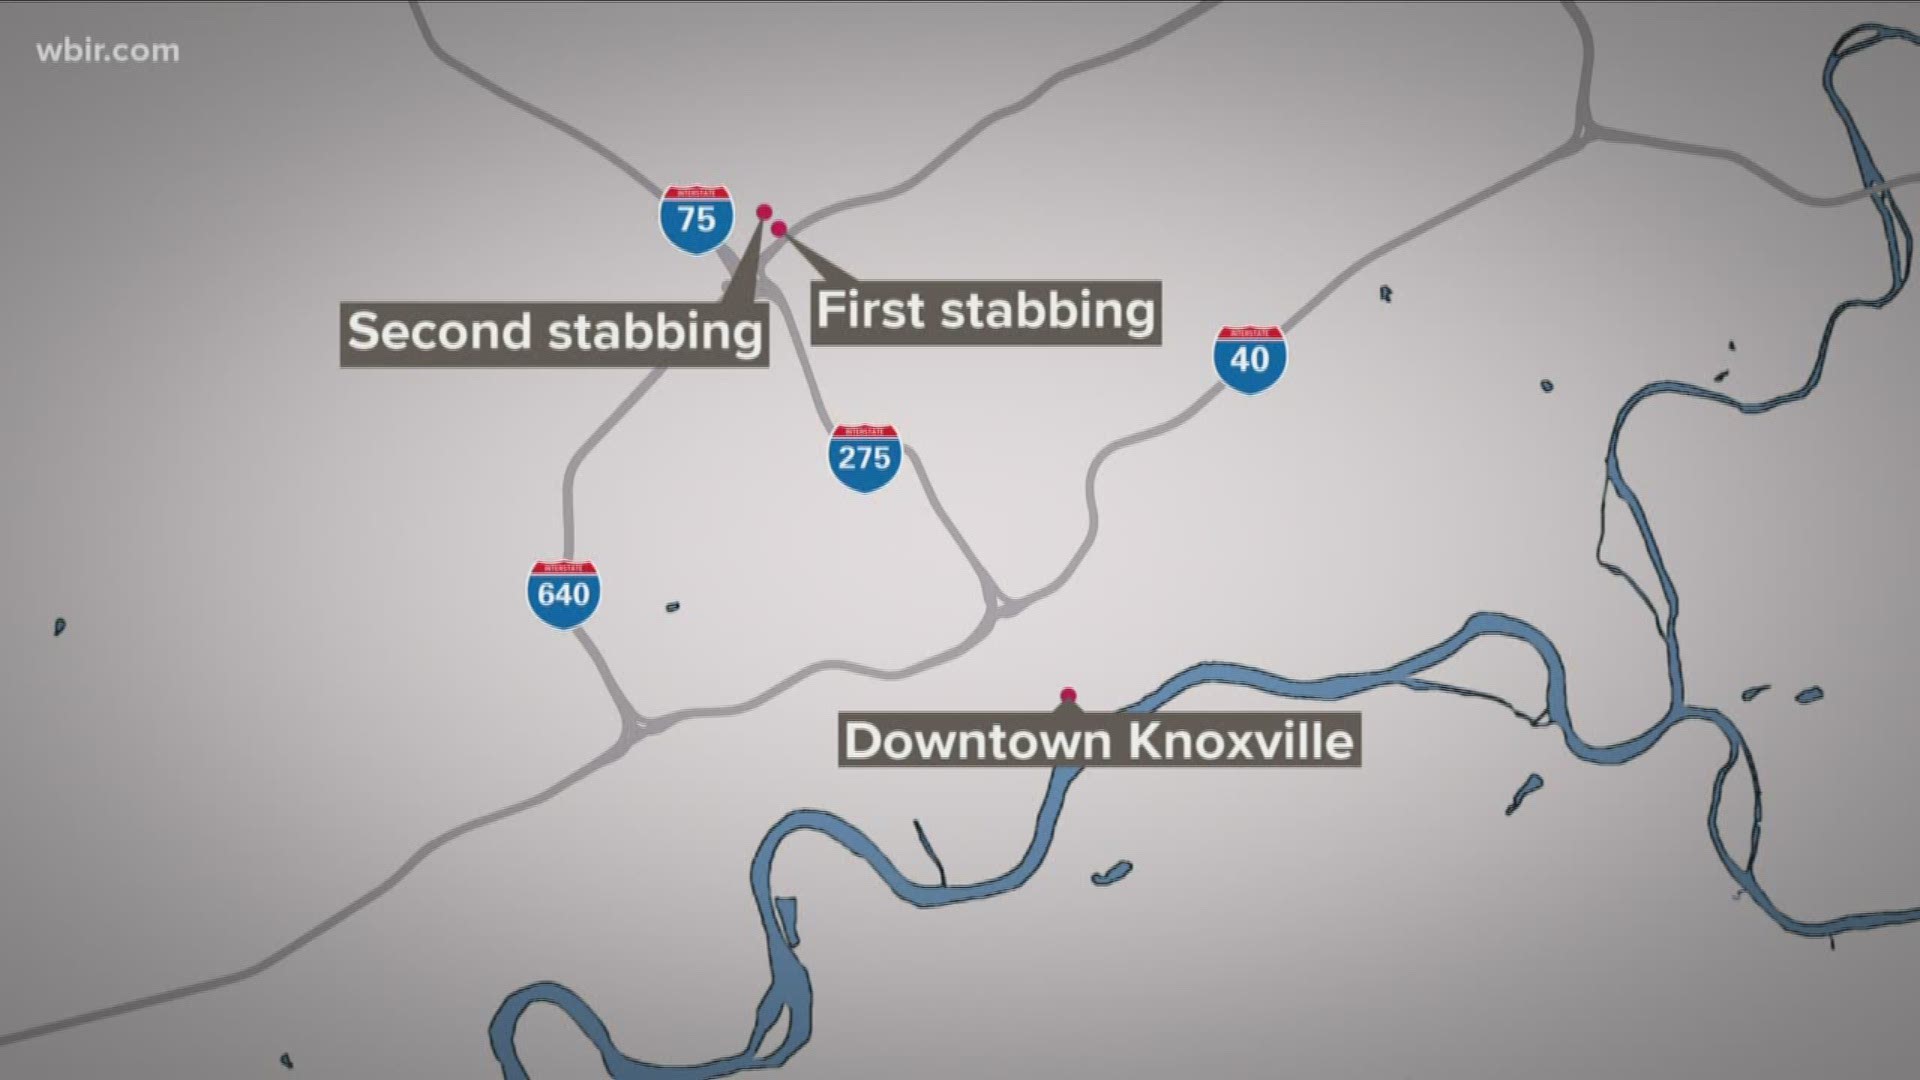 A man is facing two attempted murder charges after police say he stabbed two people on Saturday night.